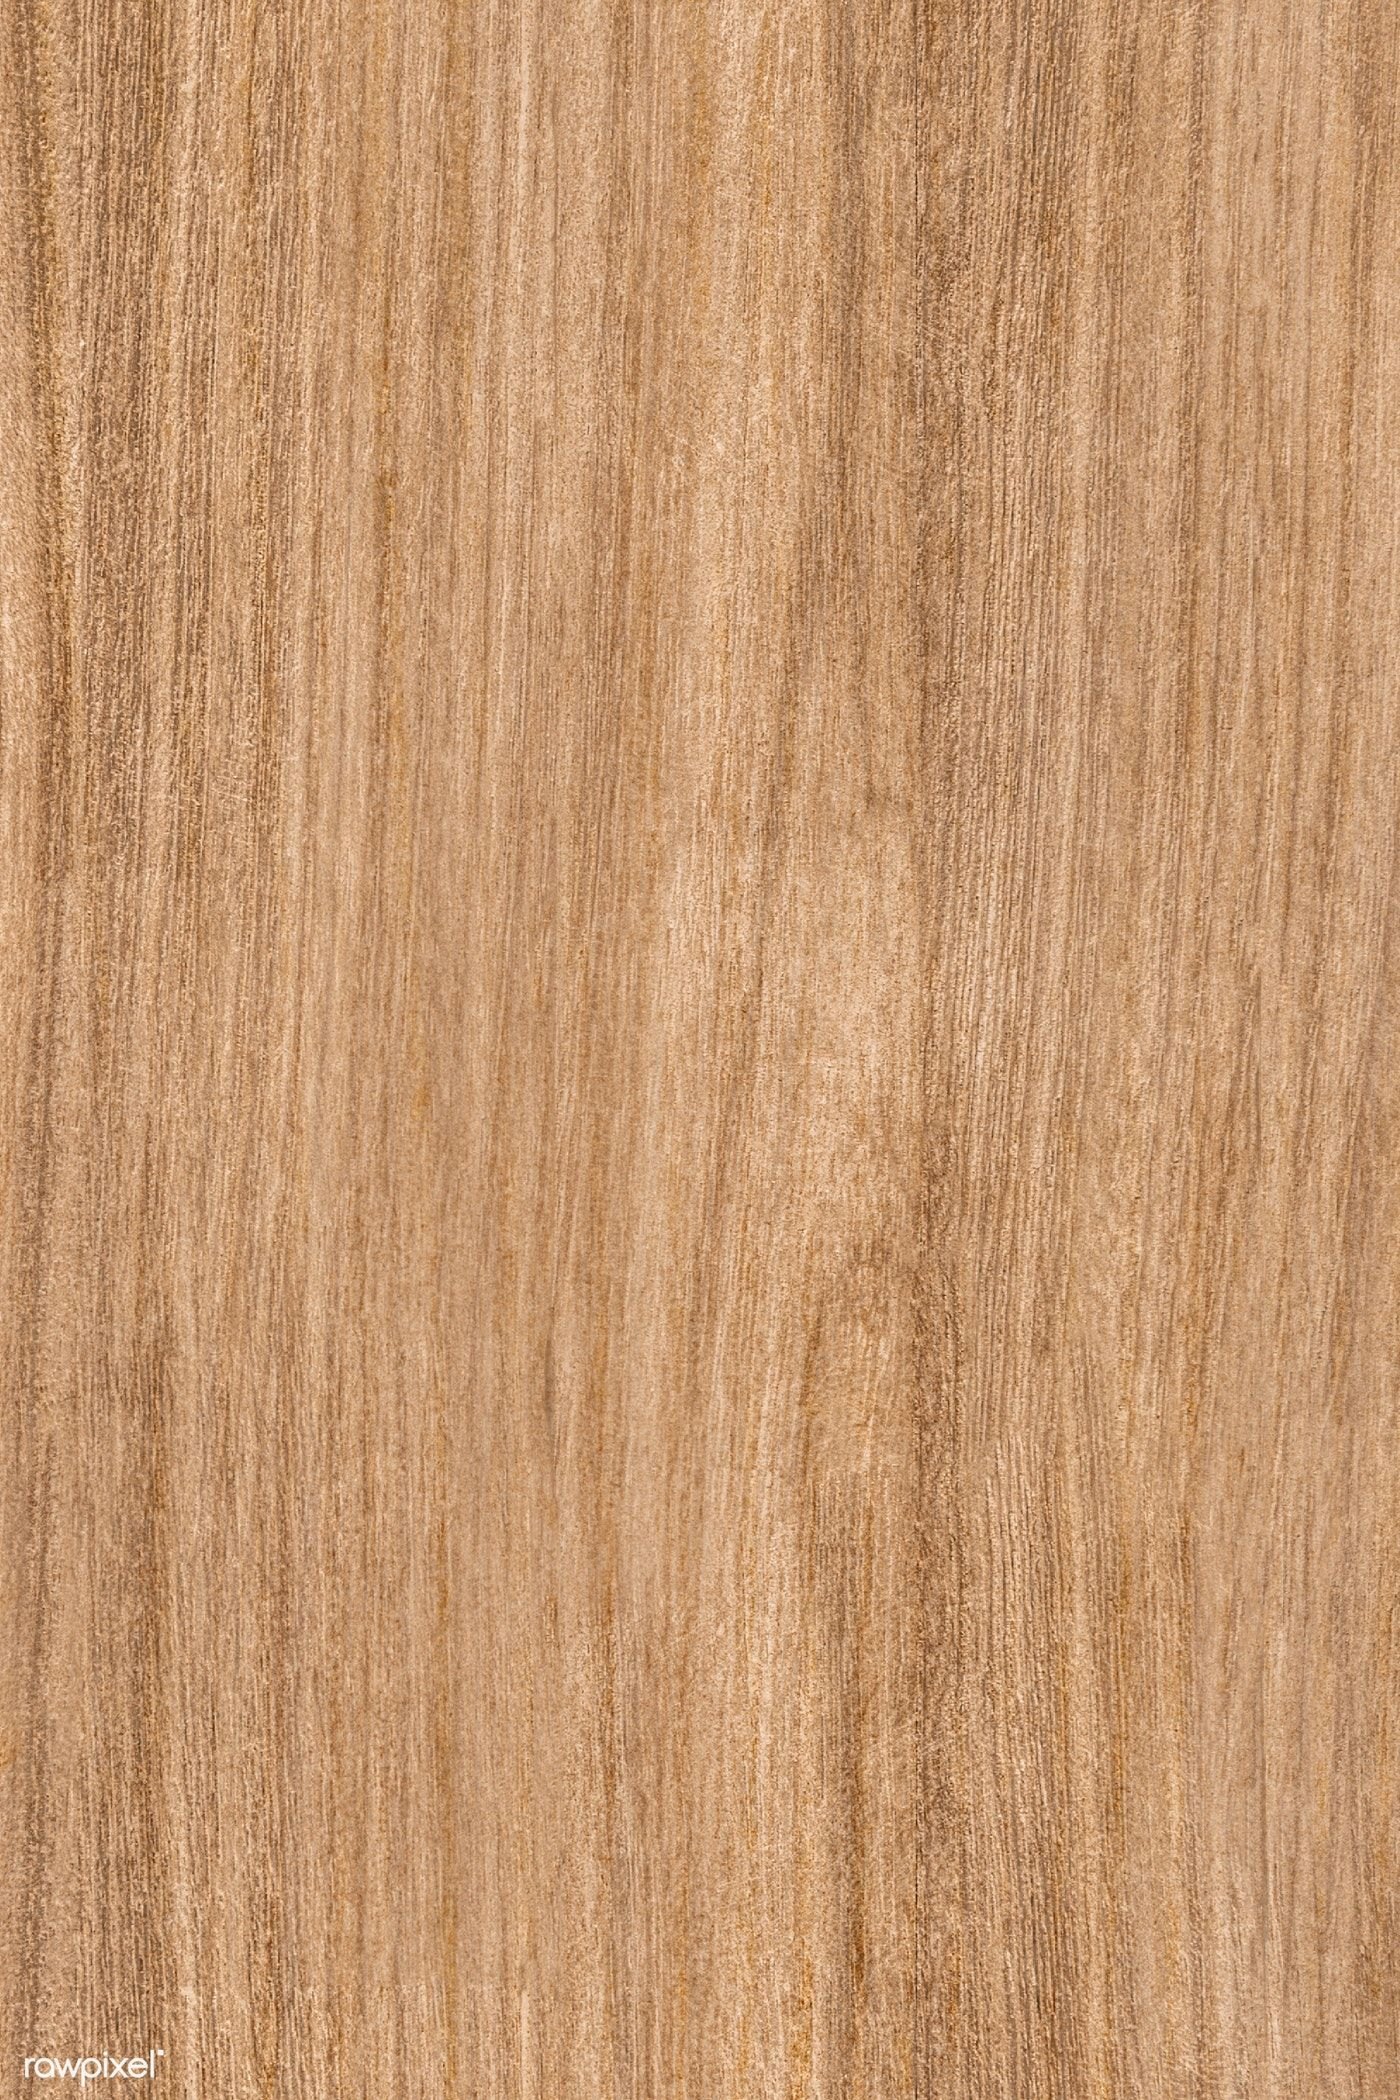 1400x2100 Brown oak wood textured design background | free image by / marinemynt | Textura de carvalho, Madeira de carvalho, Textura de madeira clara